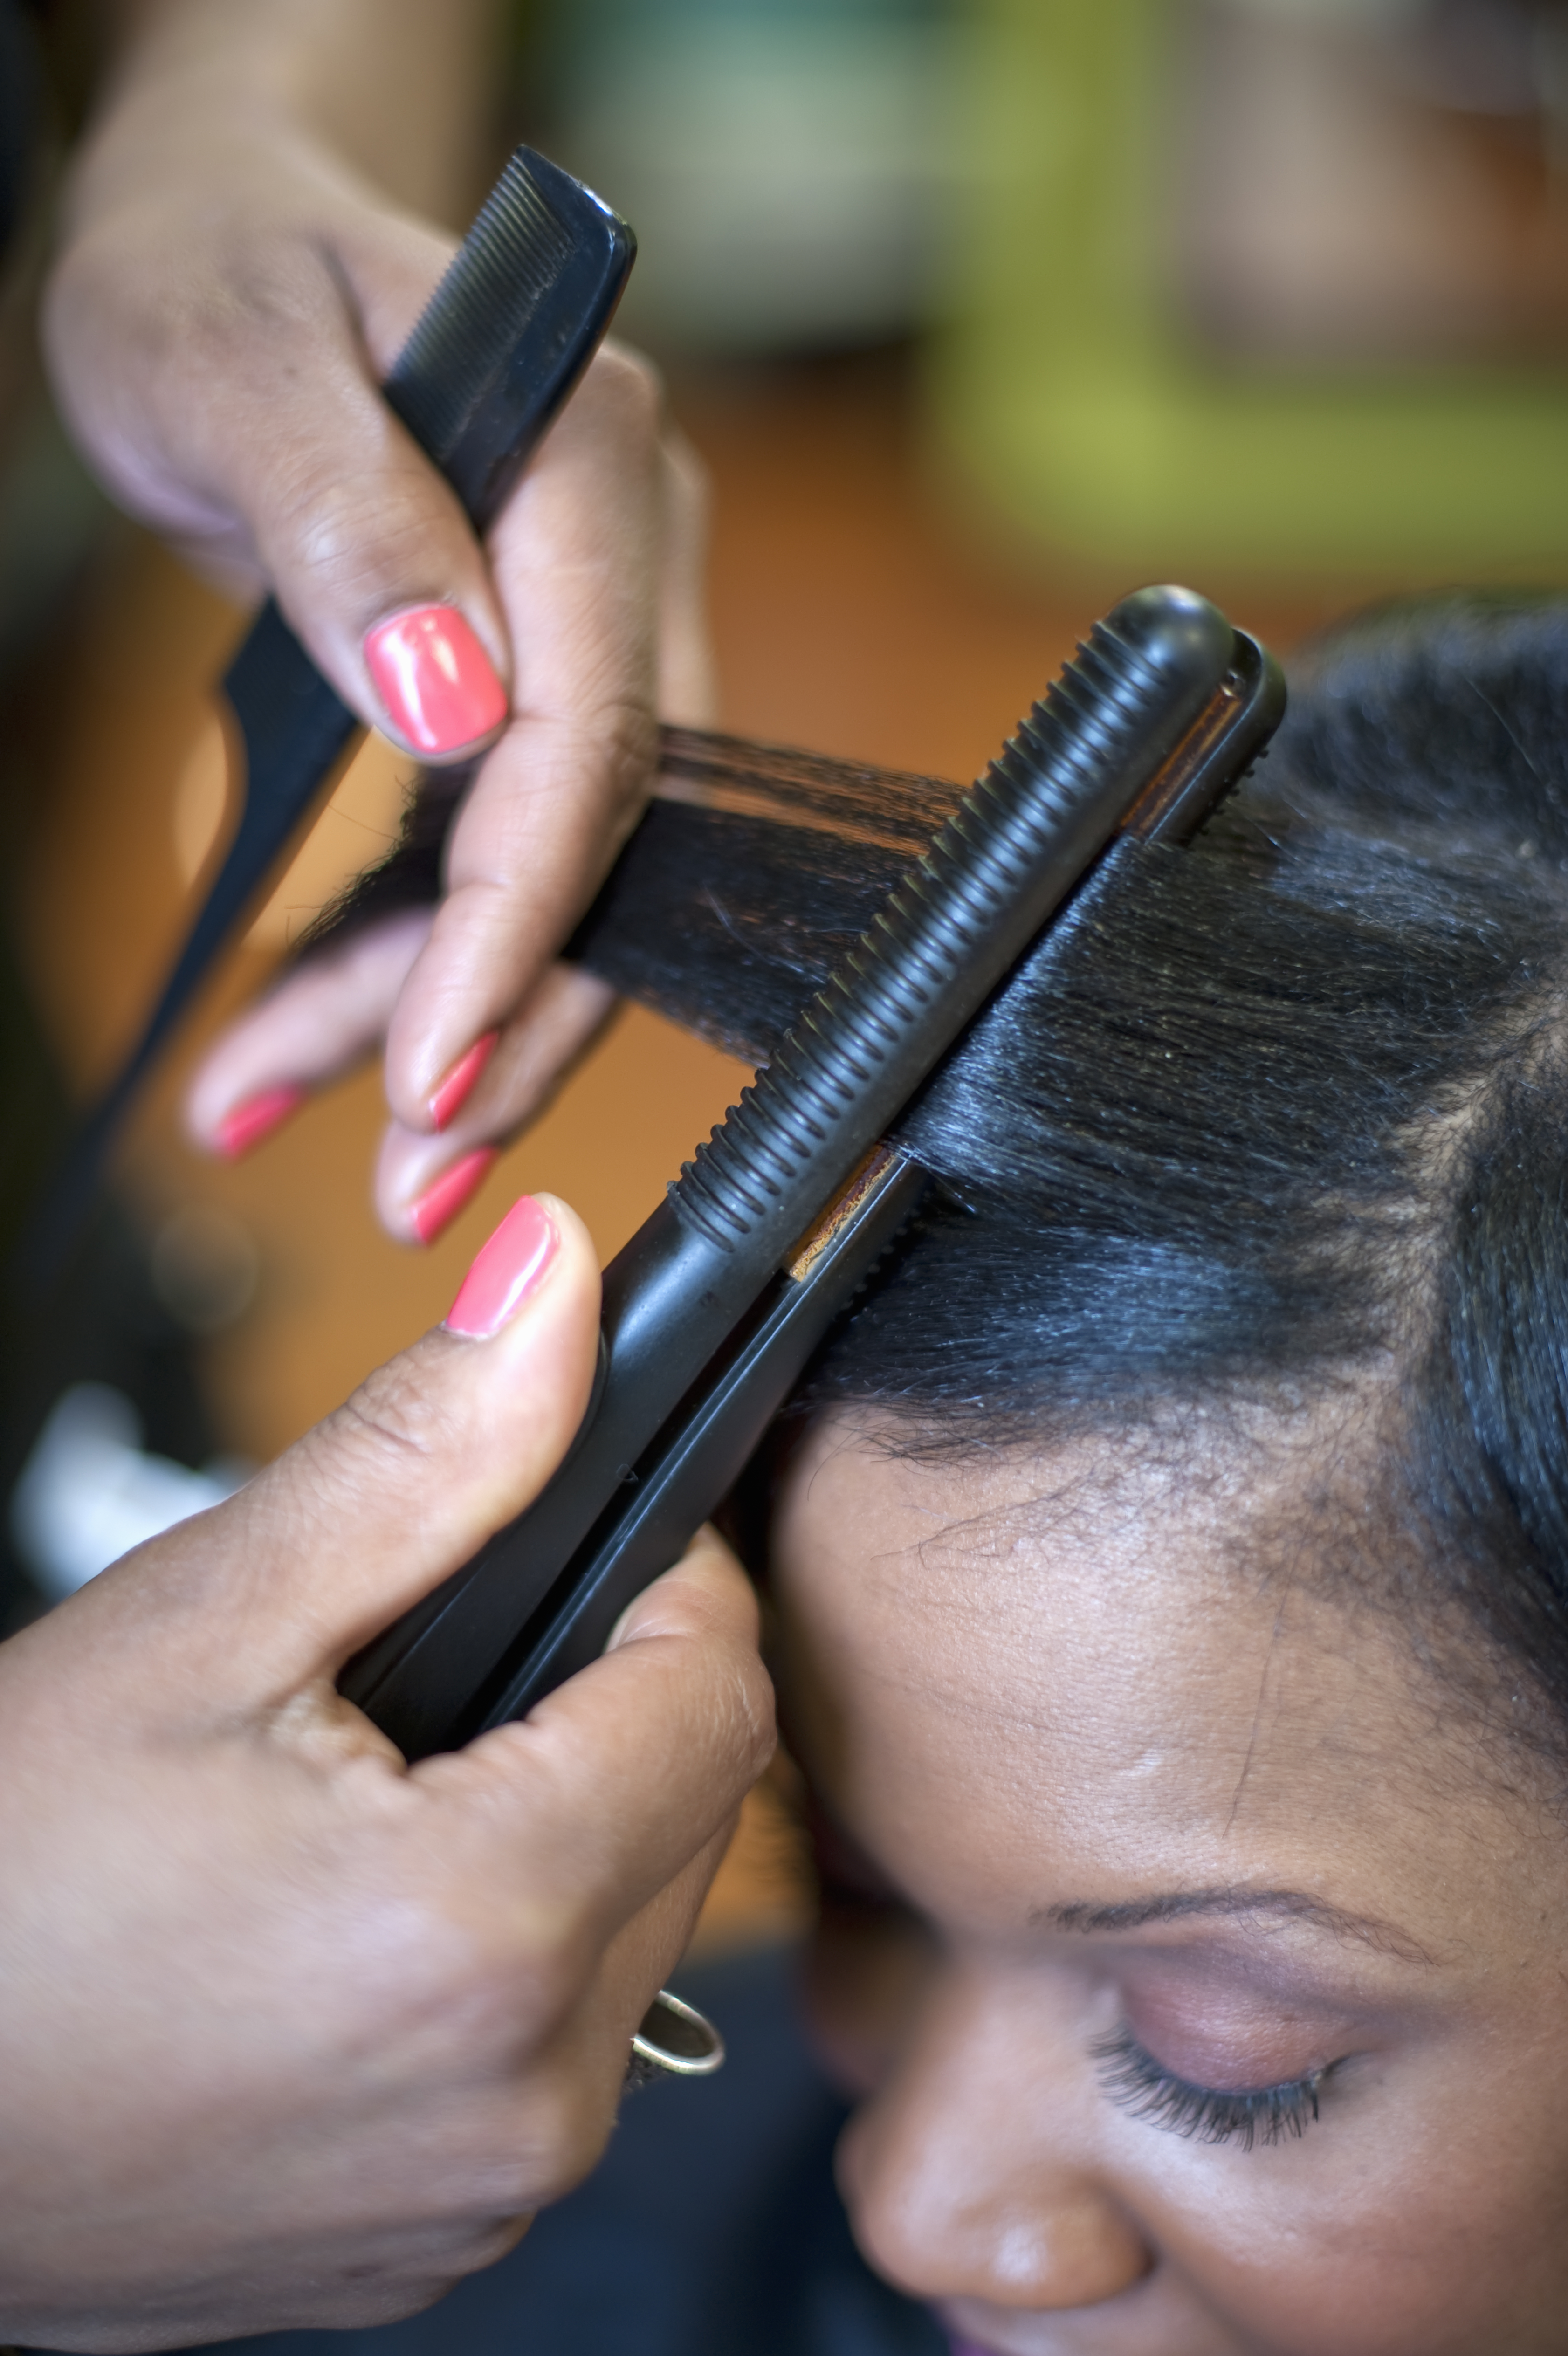 Hot Showers, Towel Wraps & 8 Other Hair Mistakes You Shouldn't Make